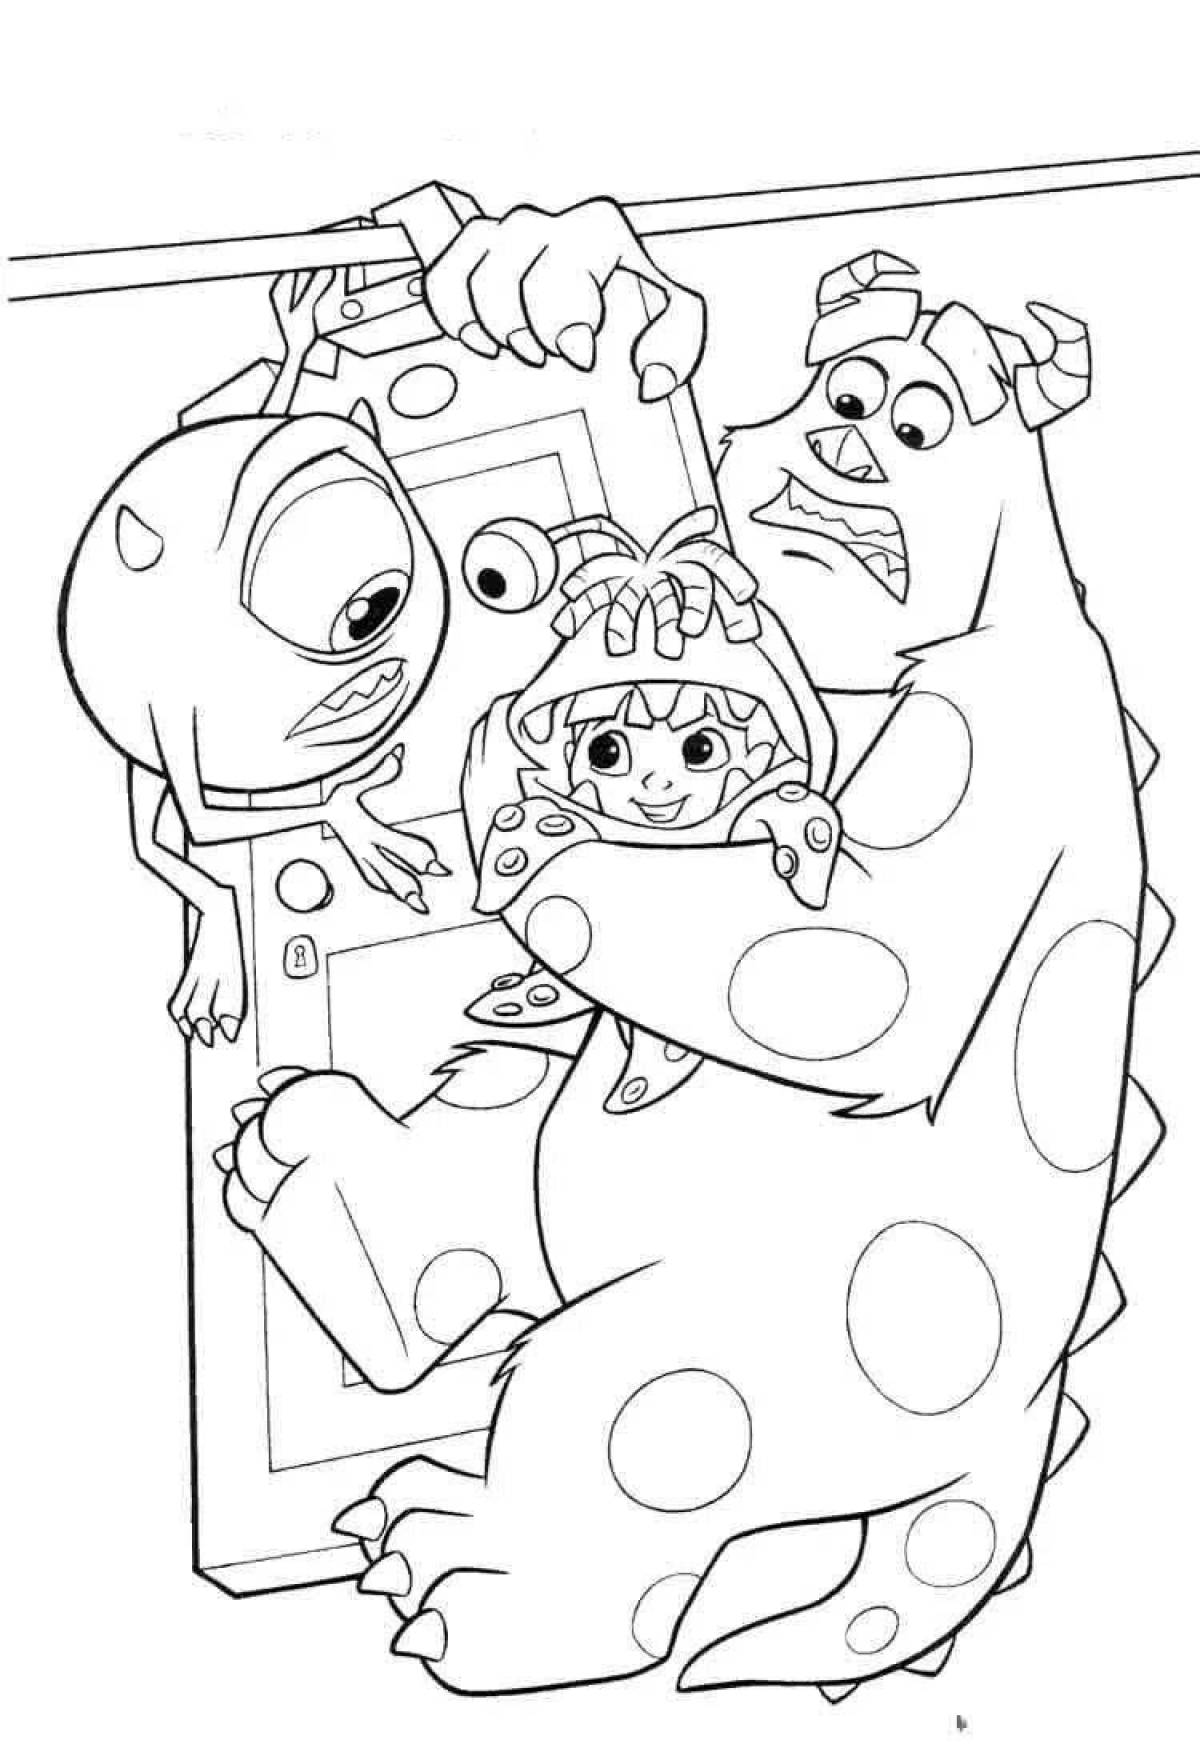 Adorable sally and boo coloring page